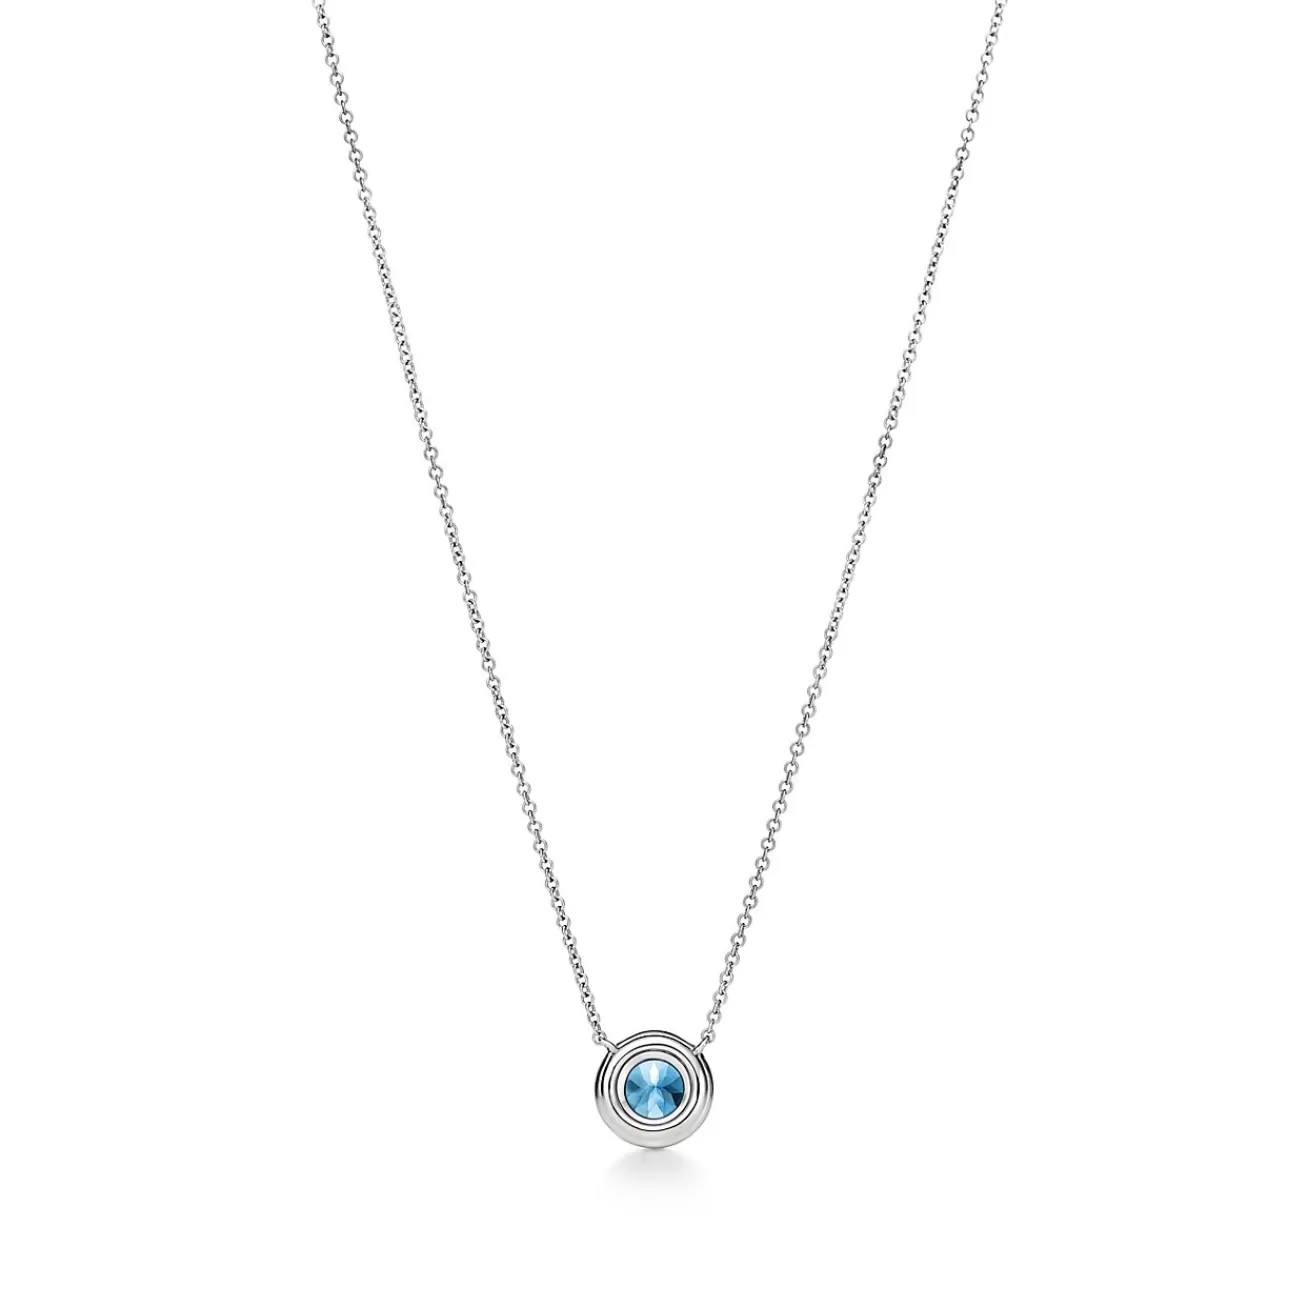 Tiffany & Co. Tiffany Soleste® pendant in platinum with an aquamarine. | ^ Necklaces & Pendants | Gifts for Her